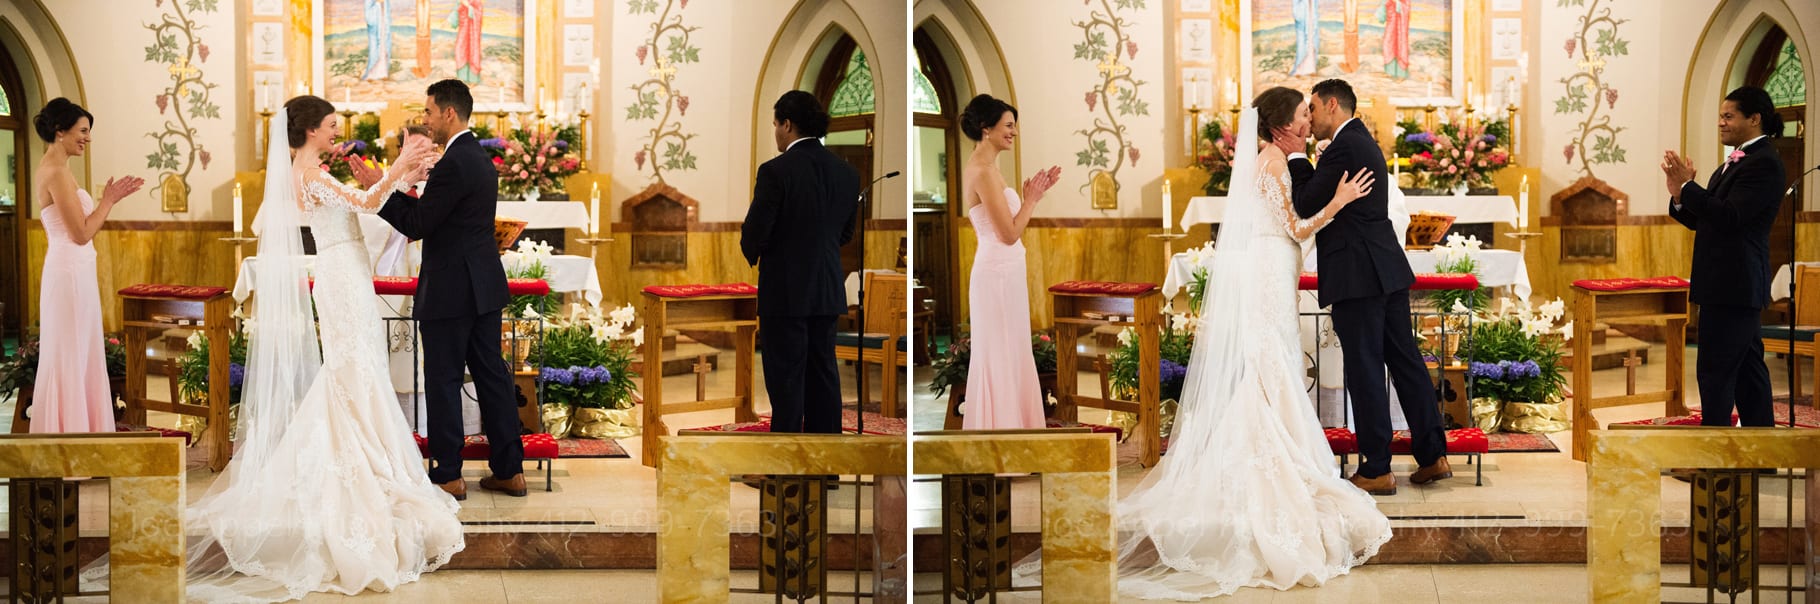 Two photos showing the sequence of a first kiss between a bride and groom on the altar of a church at the end of their wedding ceremony.